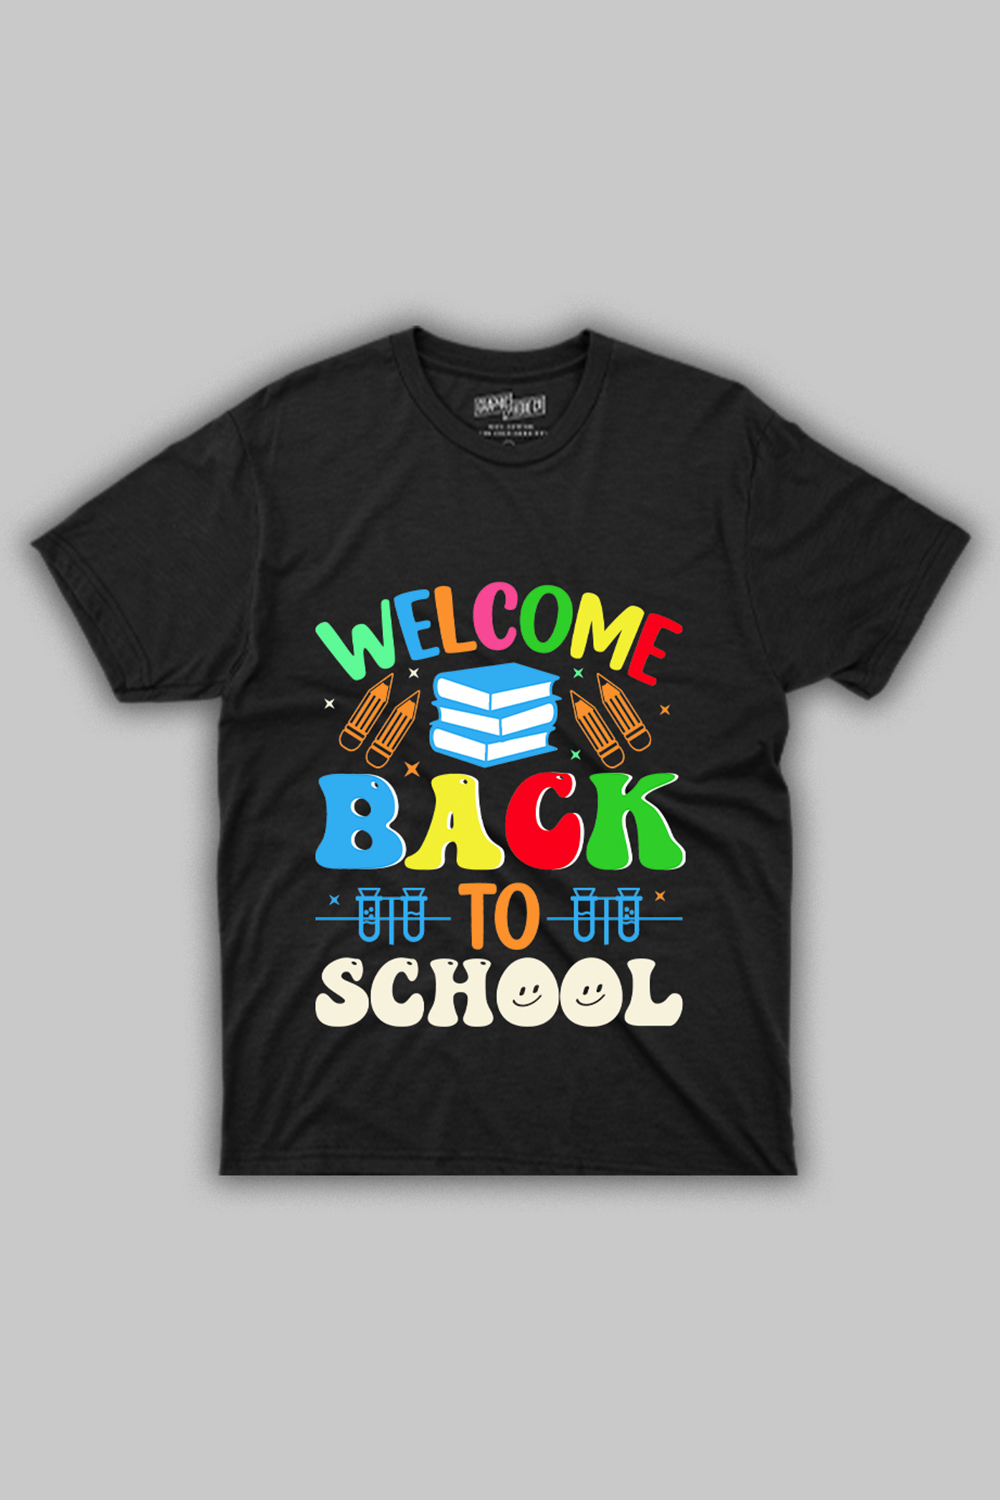 Back to School Quote T-shirt Design Pinterest image.